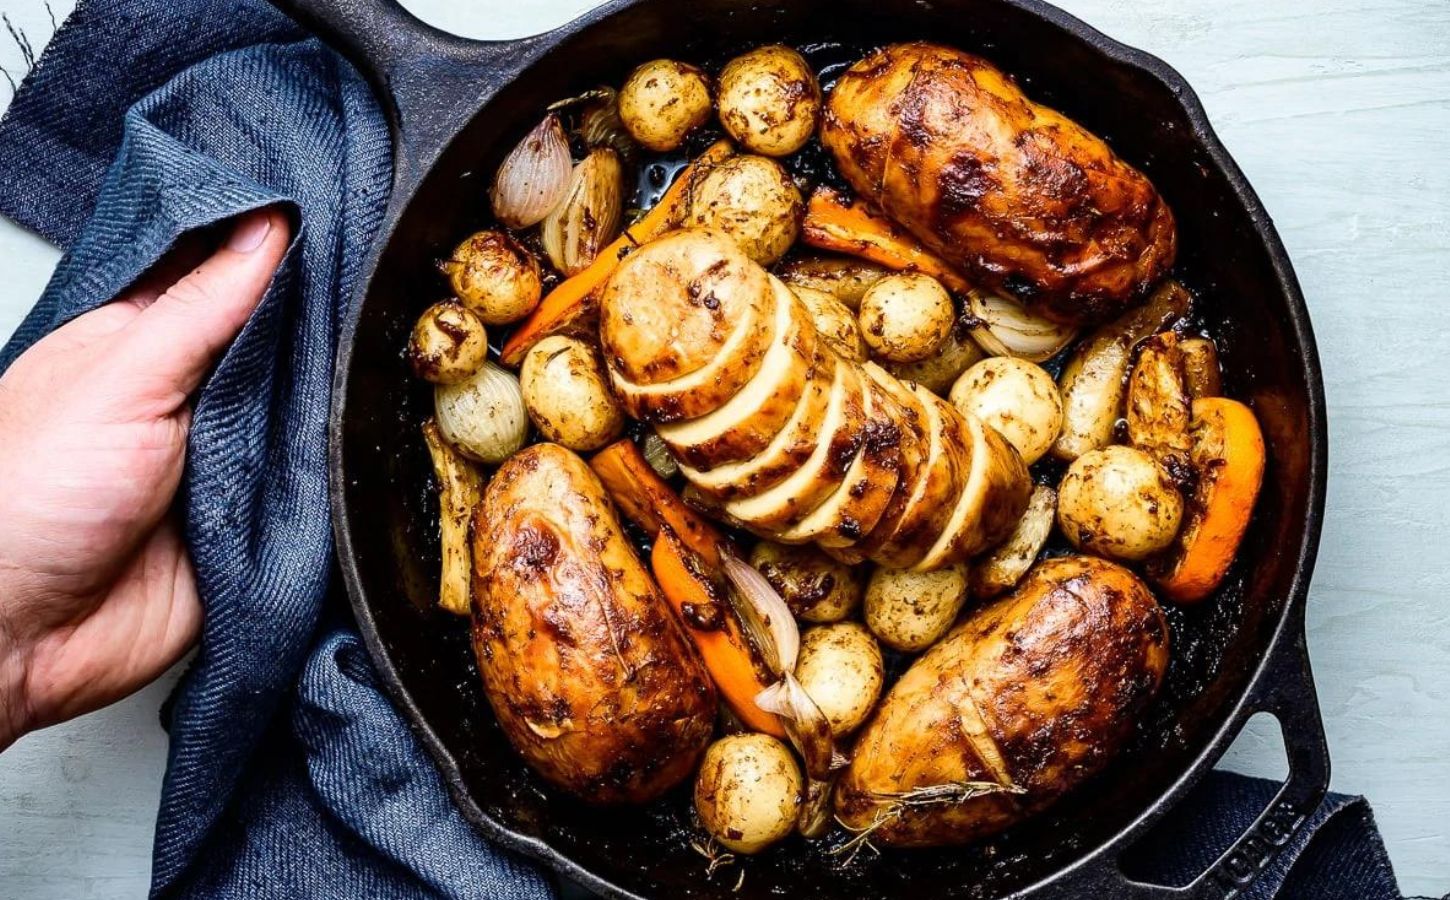 Photo shows a cast iron skillet full of roasted potatos, carrots, garlic, and carefully arranged vegan chicken.